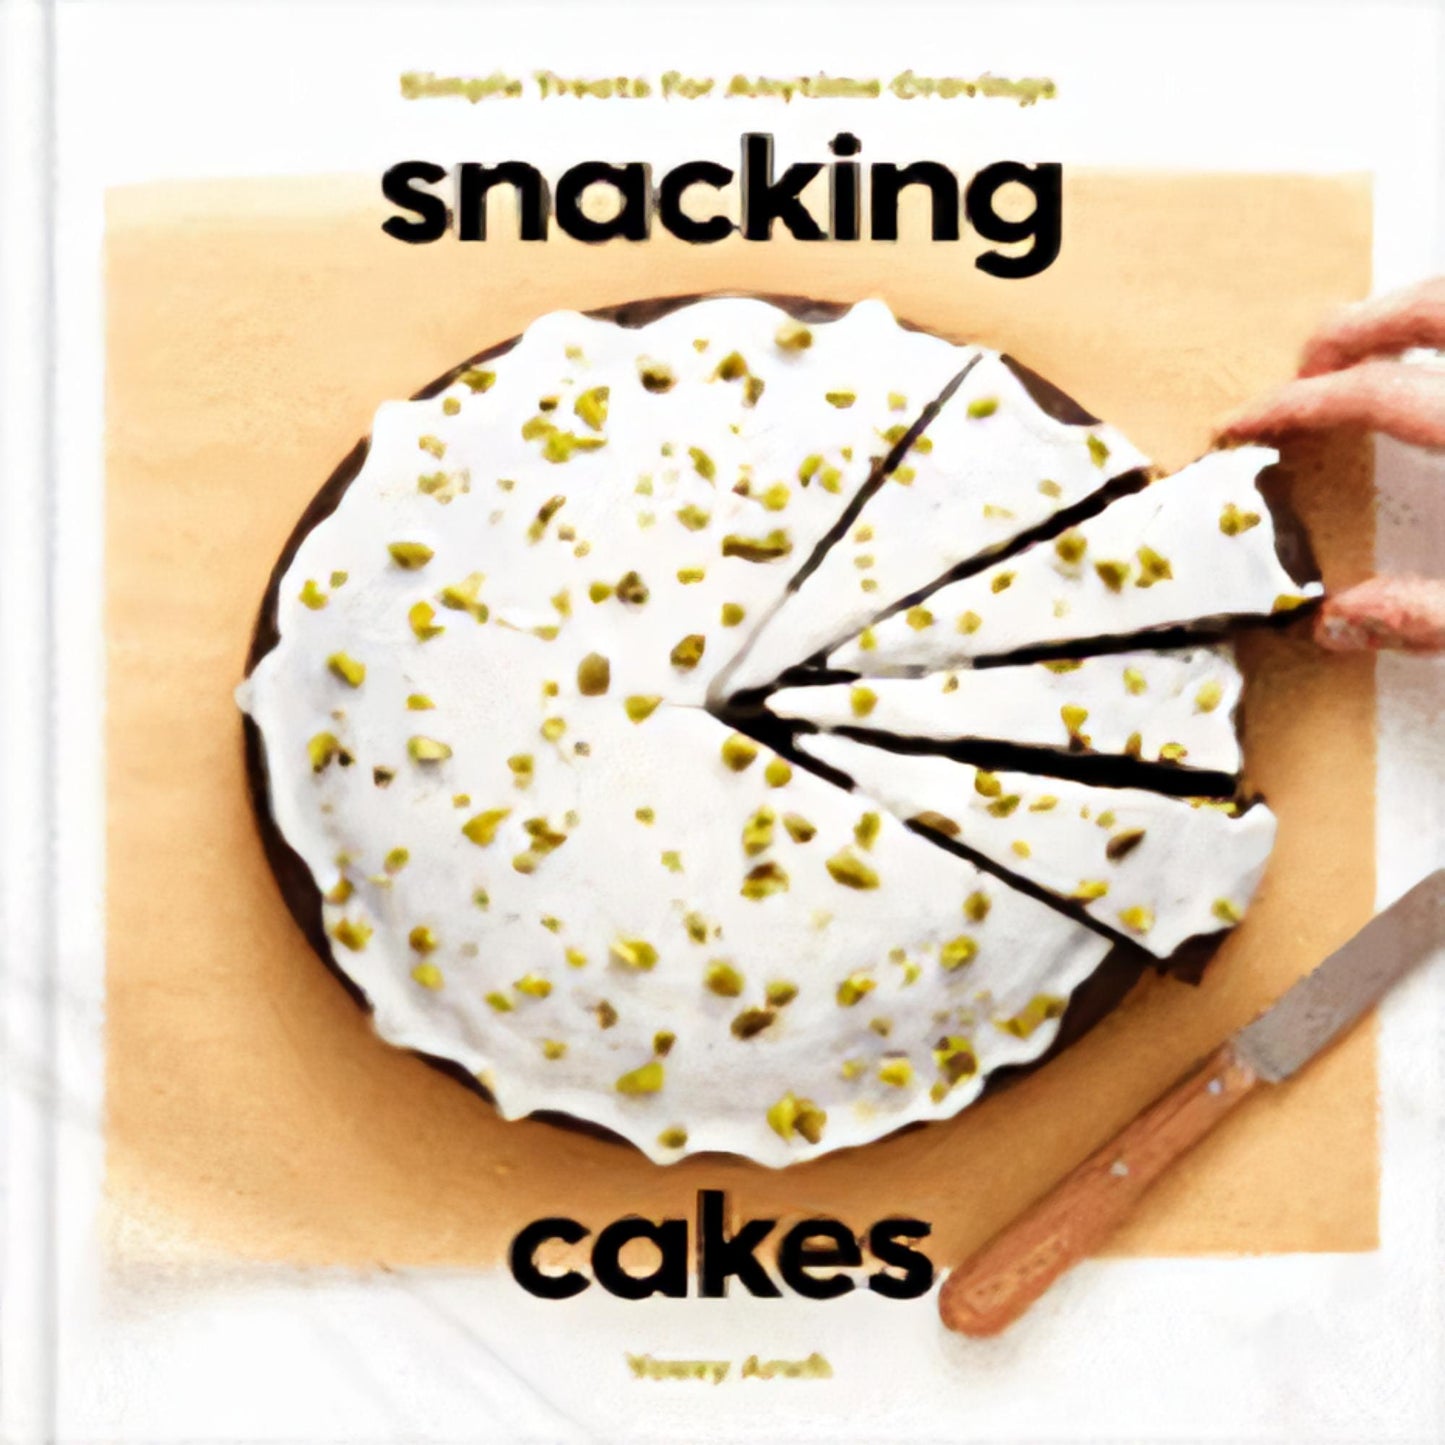 TEXTBOOK Snacking Cakes: Simple Treats for Anytime Cravings: A Baking Book180-030123-0593139666DPGBOOKSTORE.COM. Today's Bestsellers.